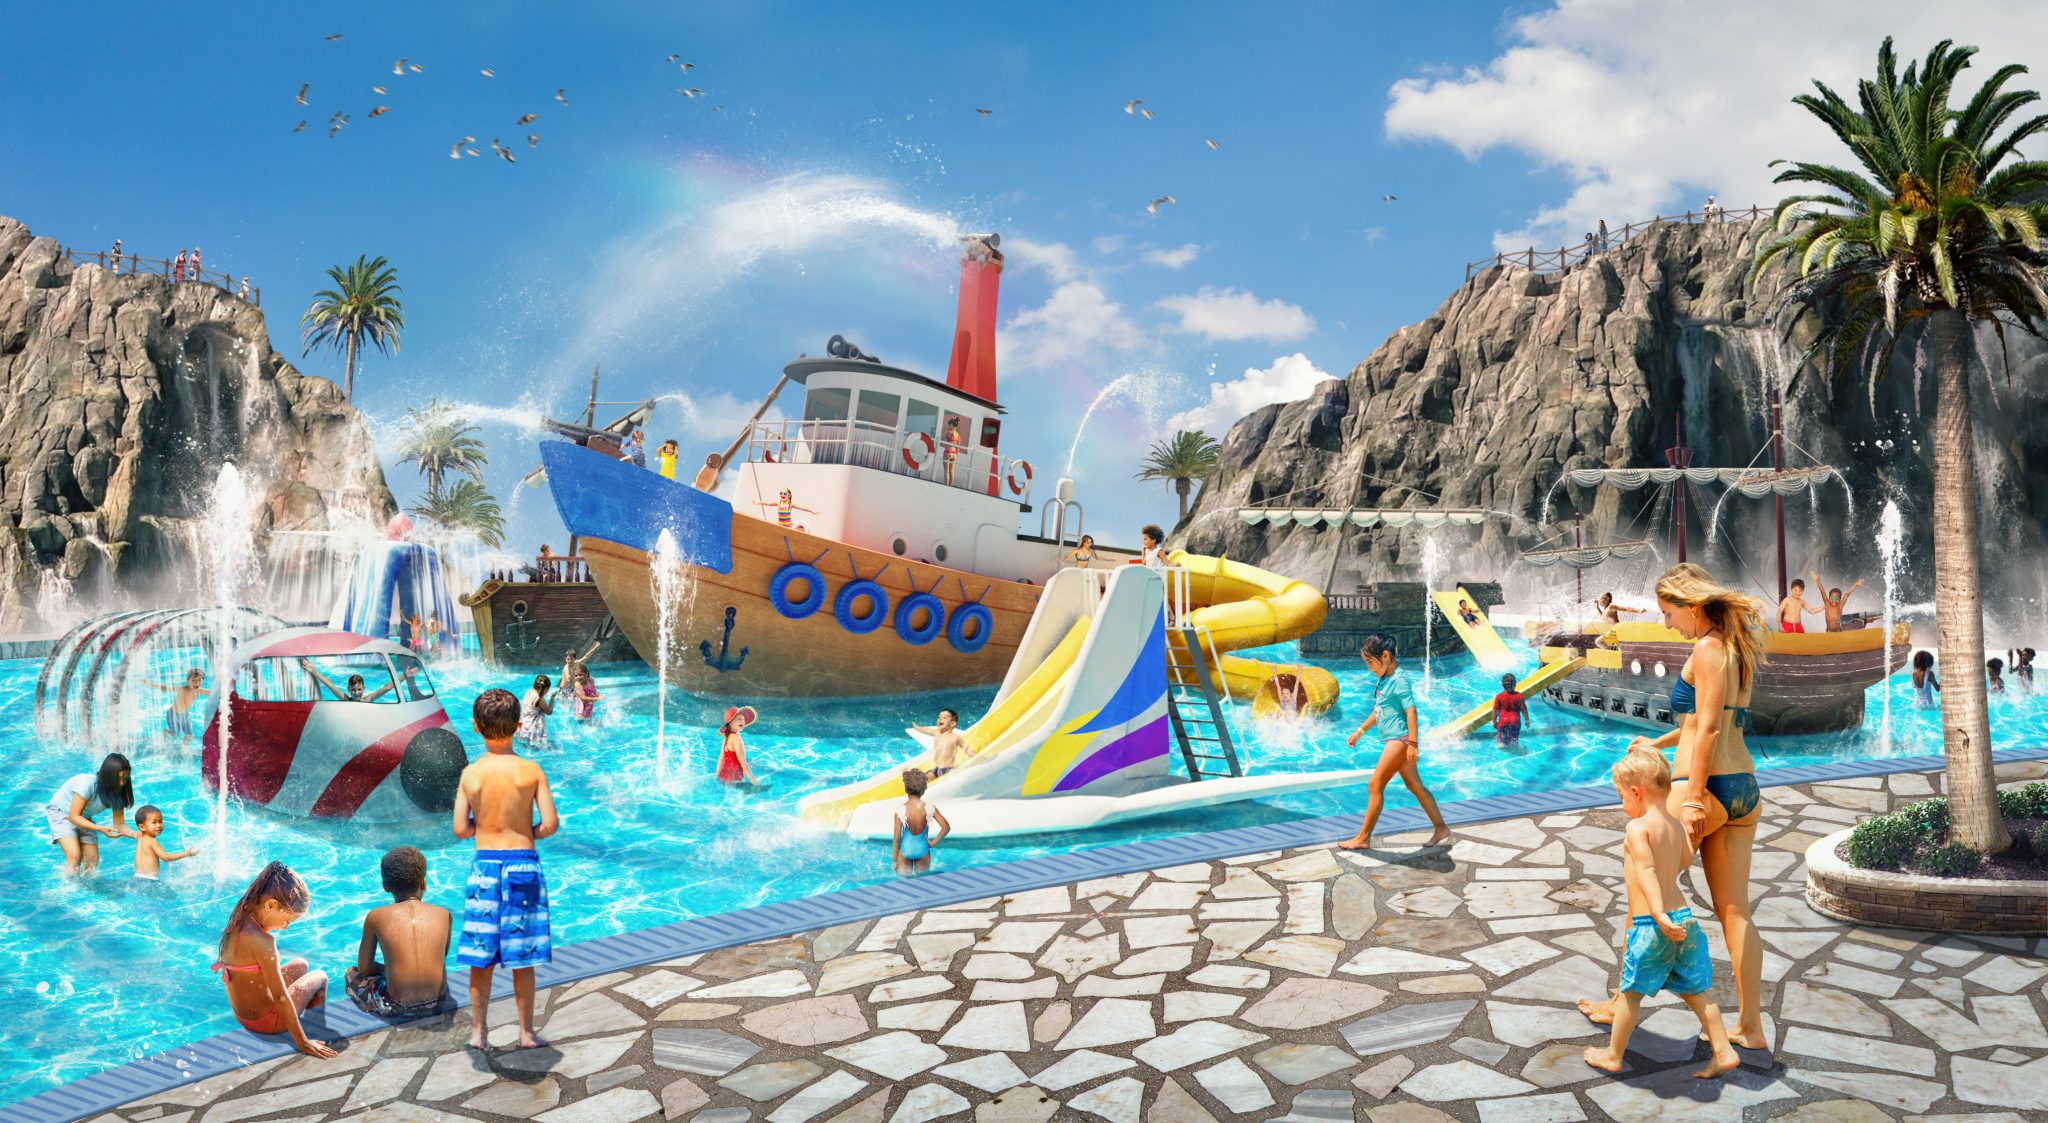 A side view of a shipwreck based waterpark with people walking around